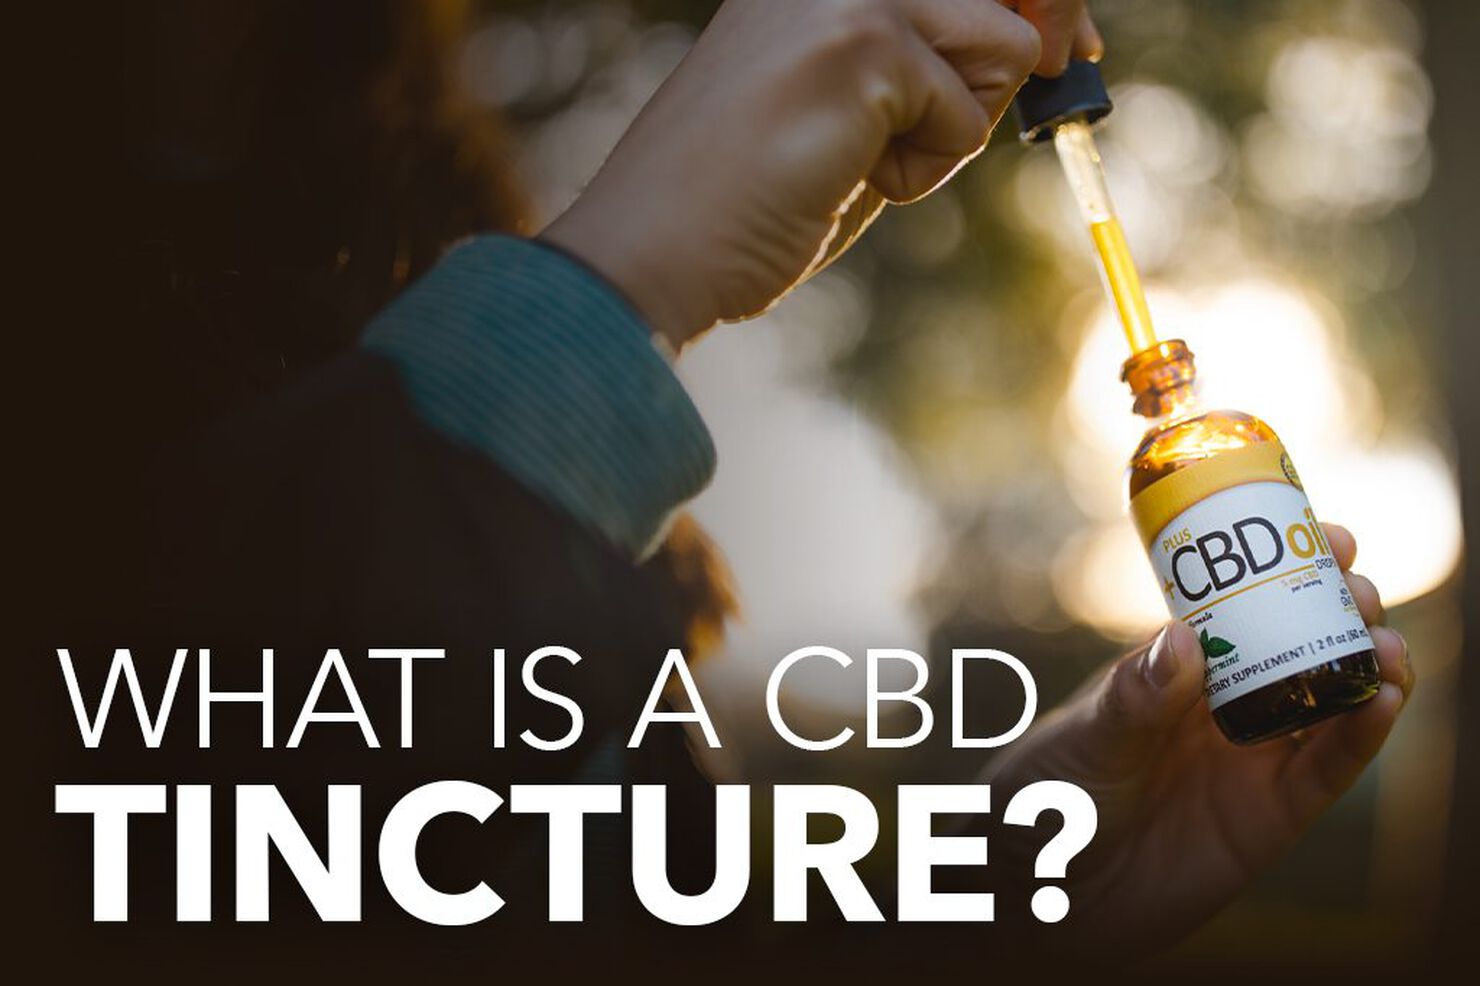 What Is a CBD Tincture? How to Use CBD Tincture Effectively